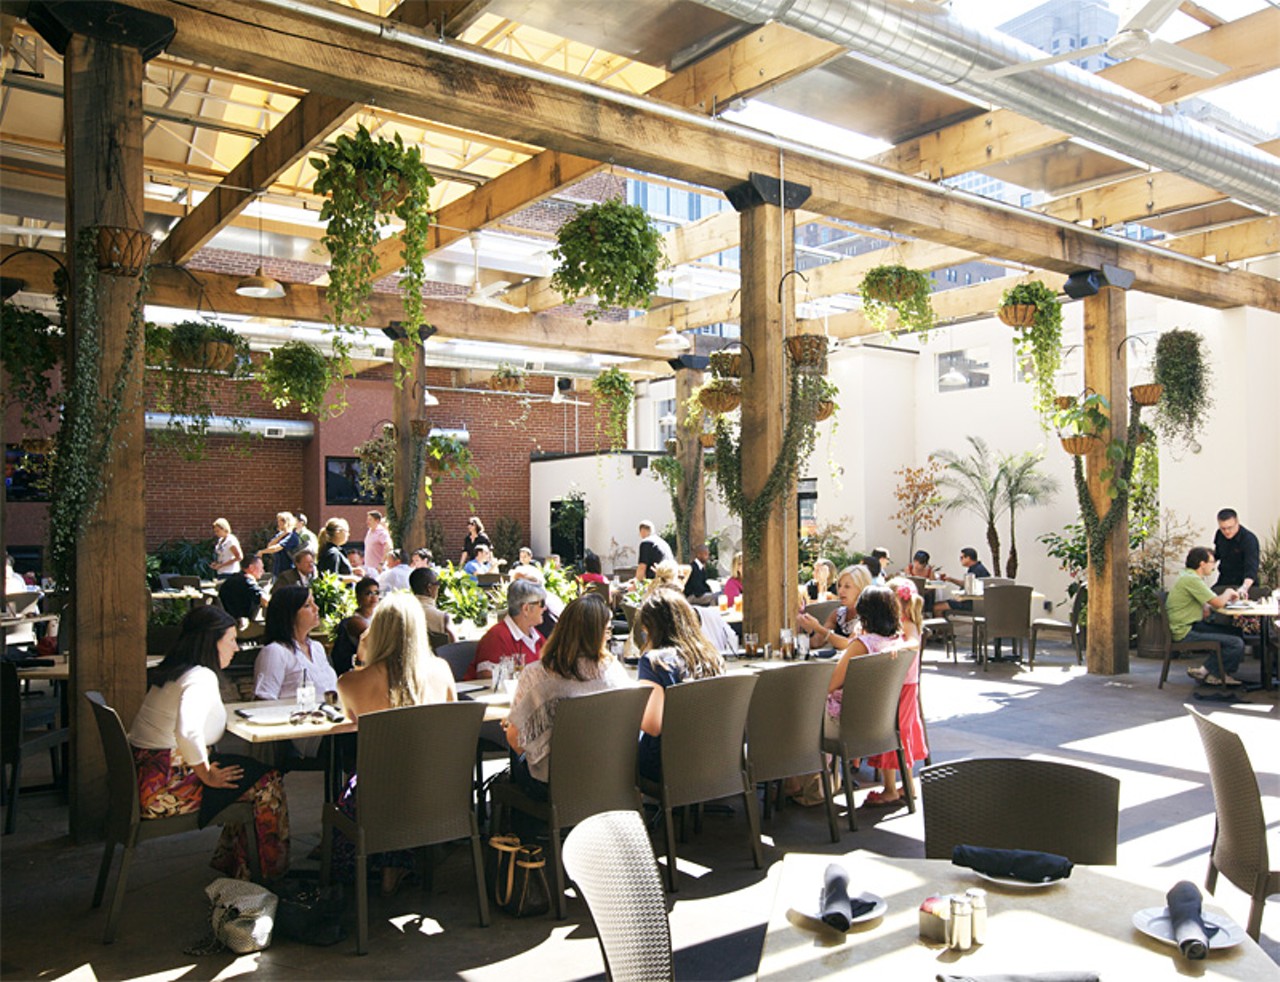 The rear dining room features a retractable roof and lush greenery.